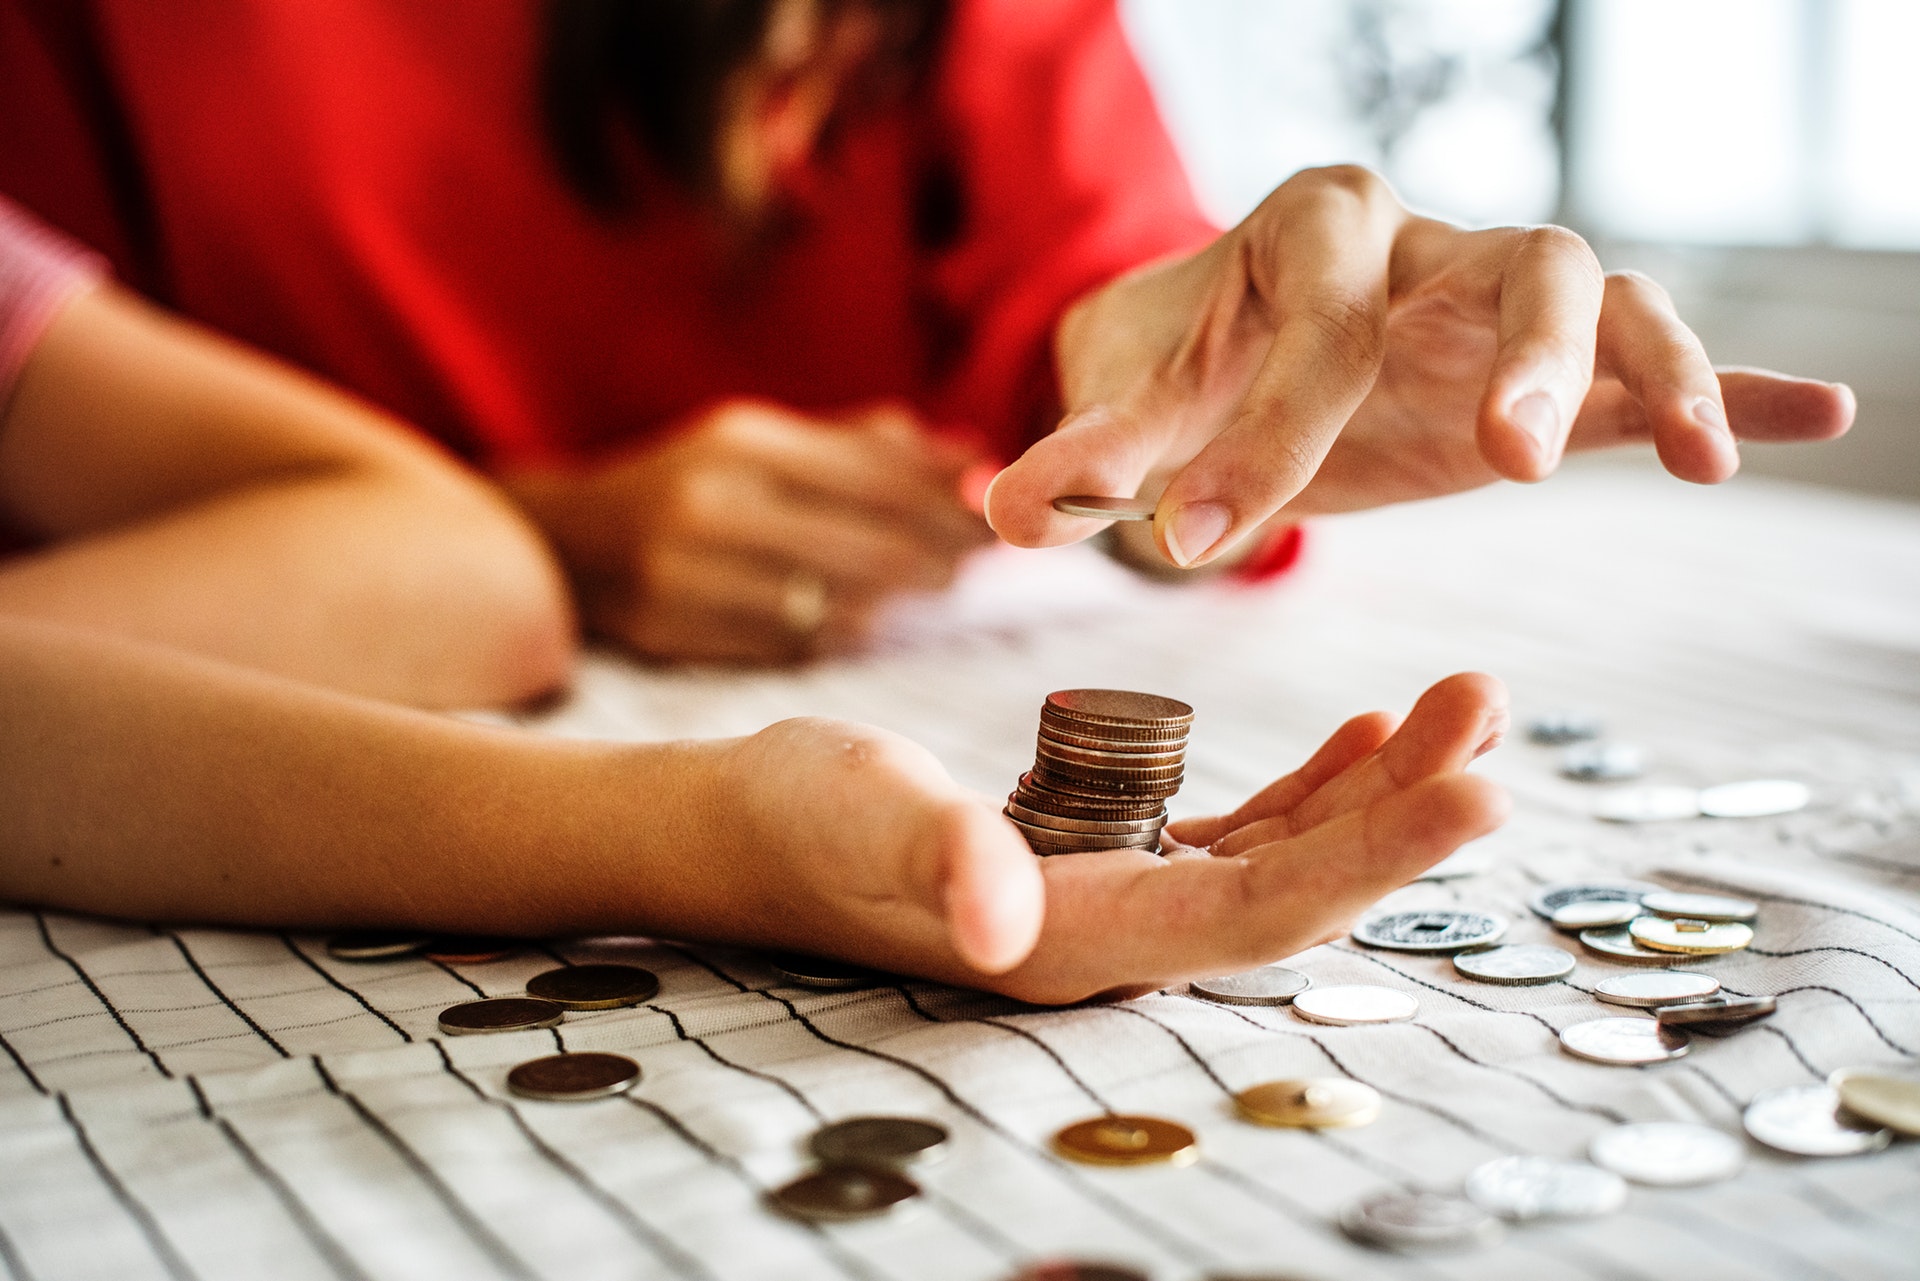 stack of change in man's hand as woman adds coins to the top of the stack